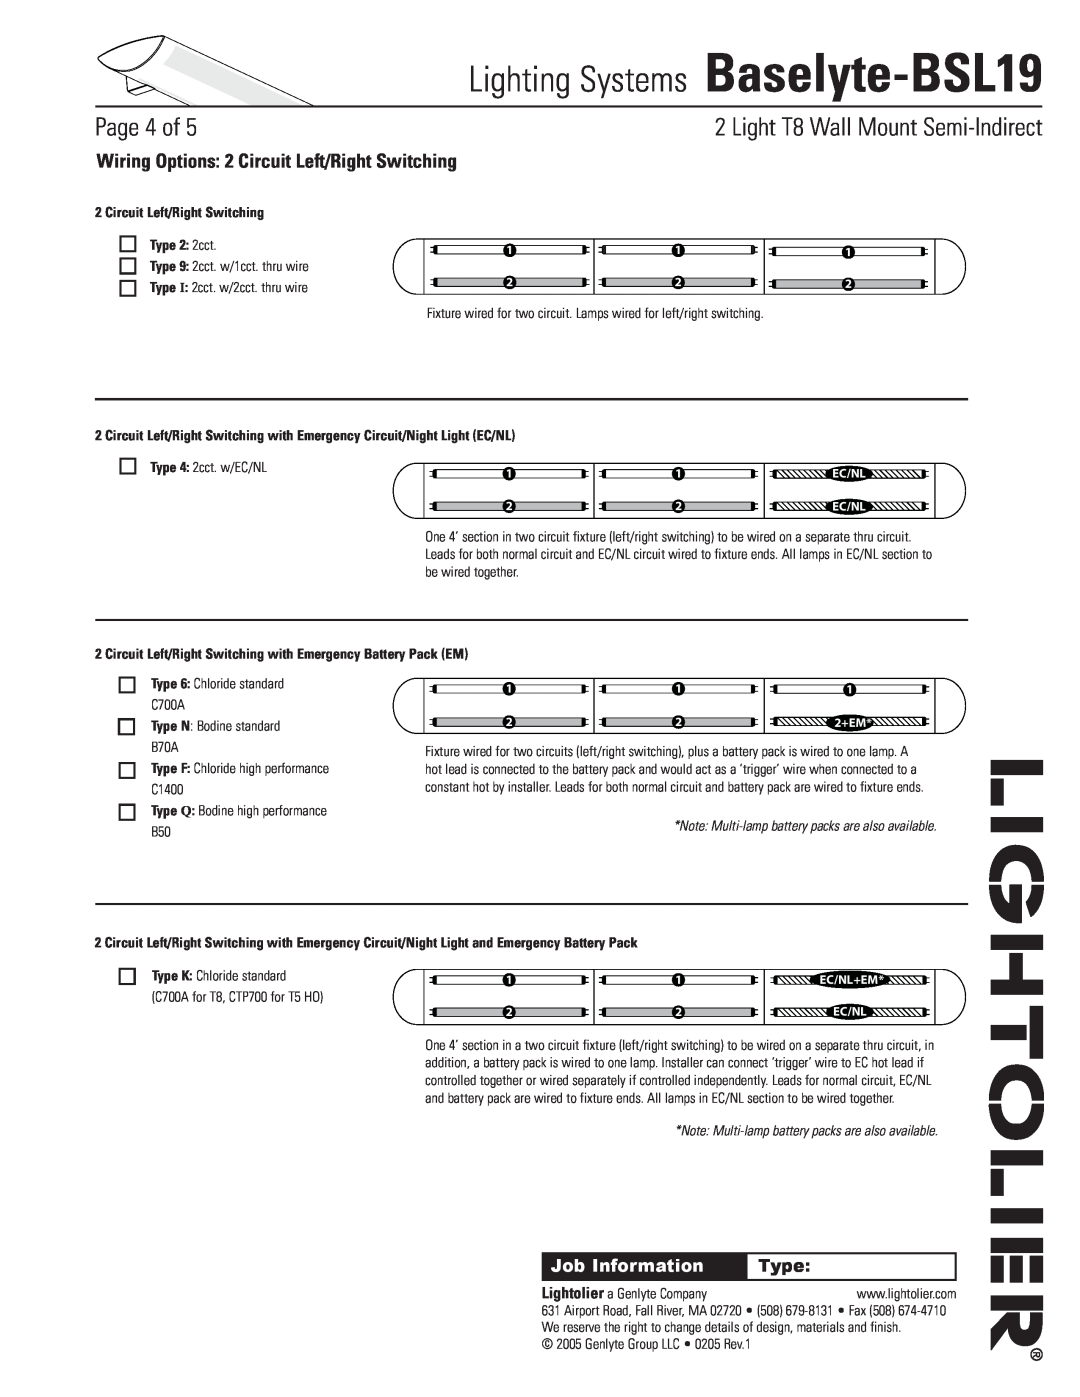 Lightolier Baselyte-BSL19 Wiring Options 2 Circuit Left/Right Switching, Circuit Left/Right Switching Type 2 2cct, Page of 